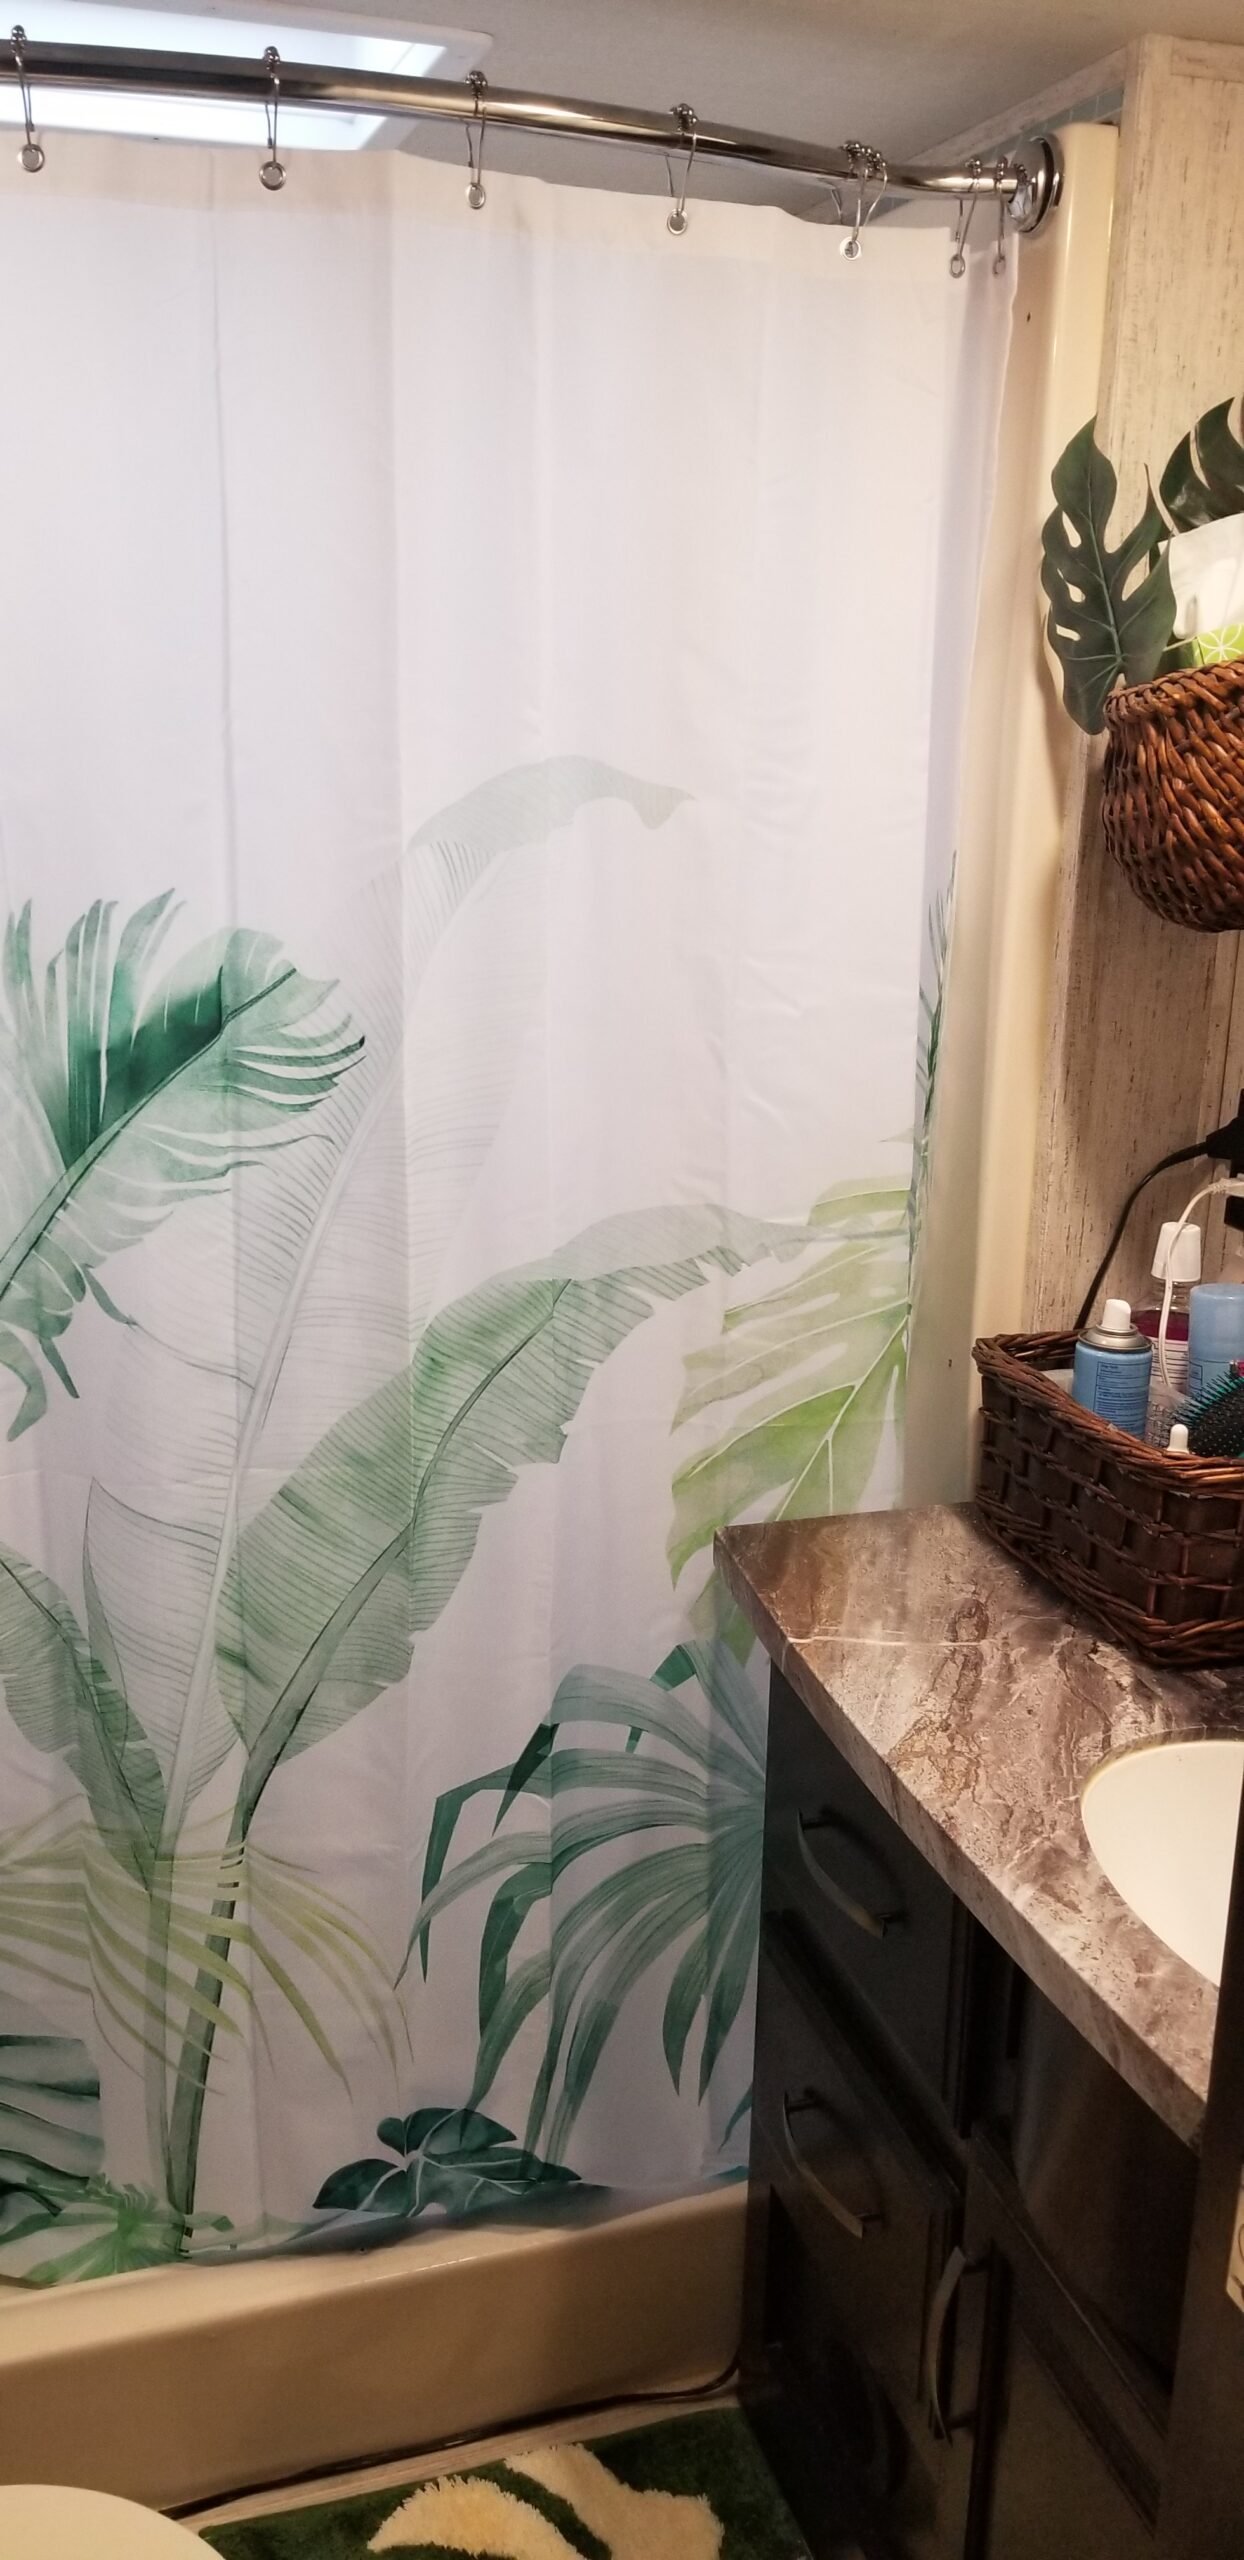 New shower curtain and curved shower rod